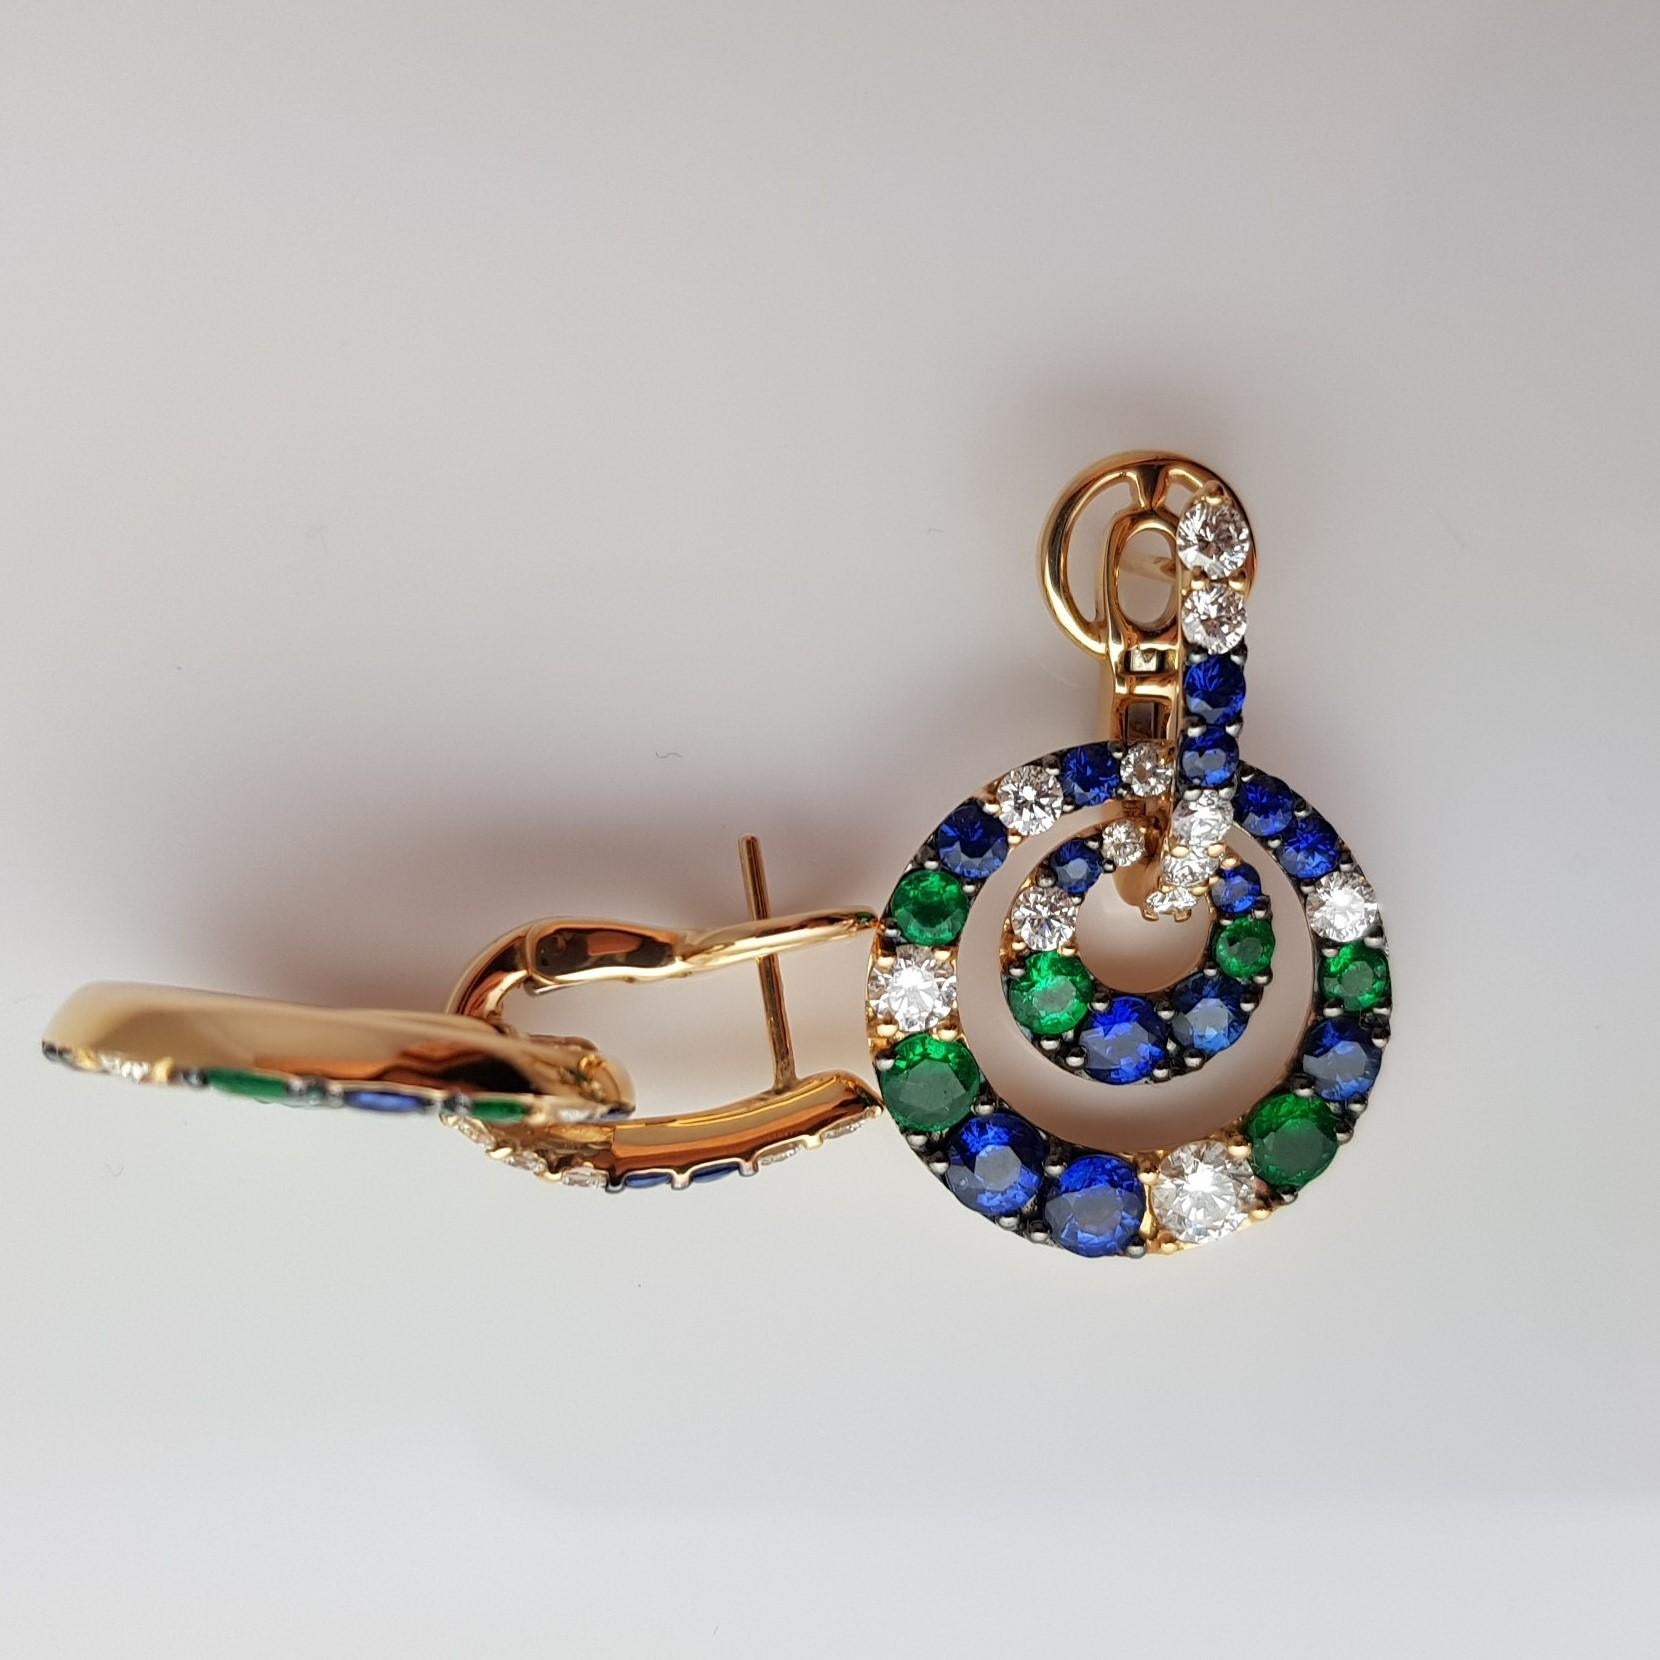 Contemporary 18 Karat Yellow Gold Earrings with Diamonds, Blue Sapphires and Emeralds